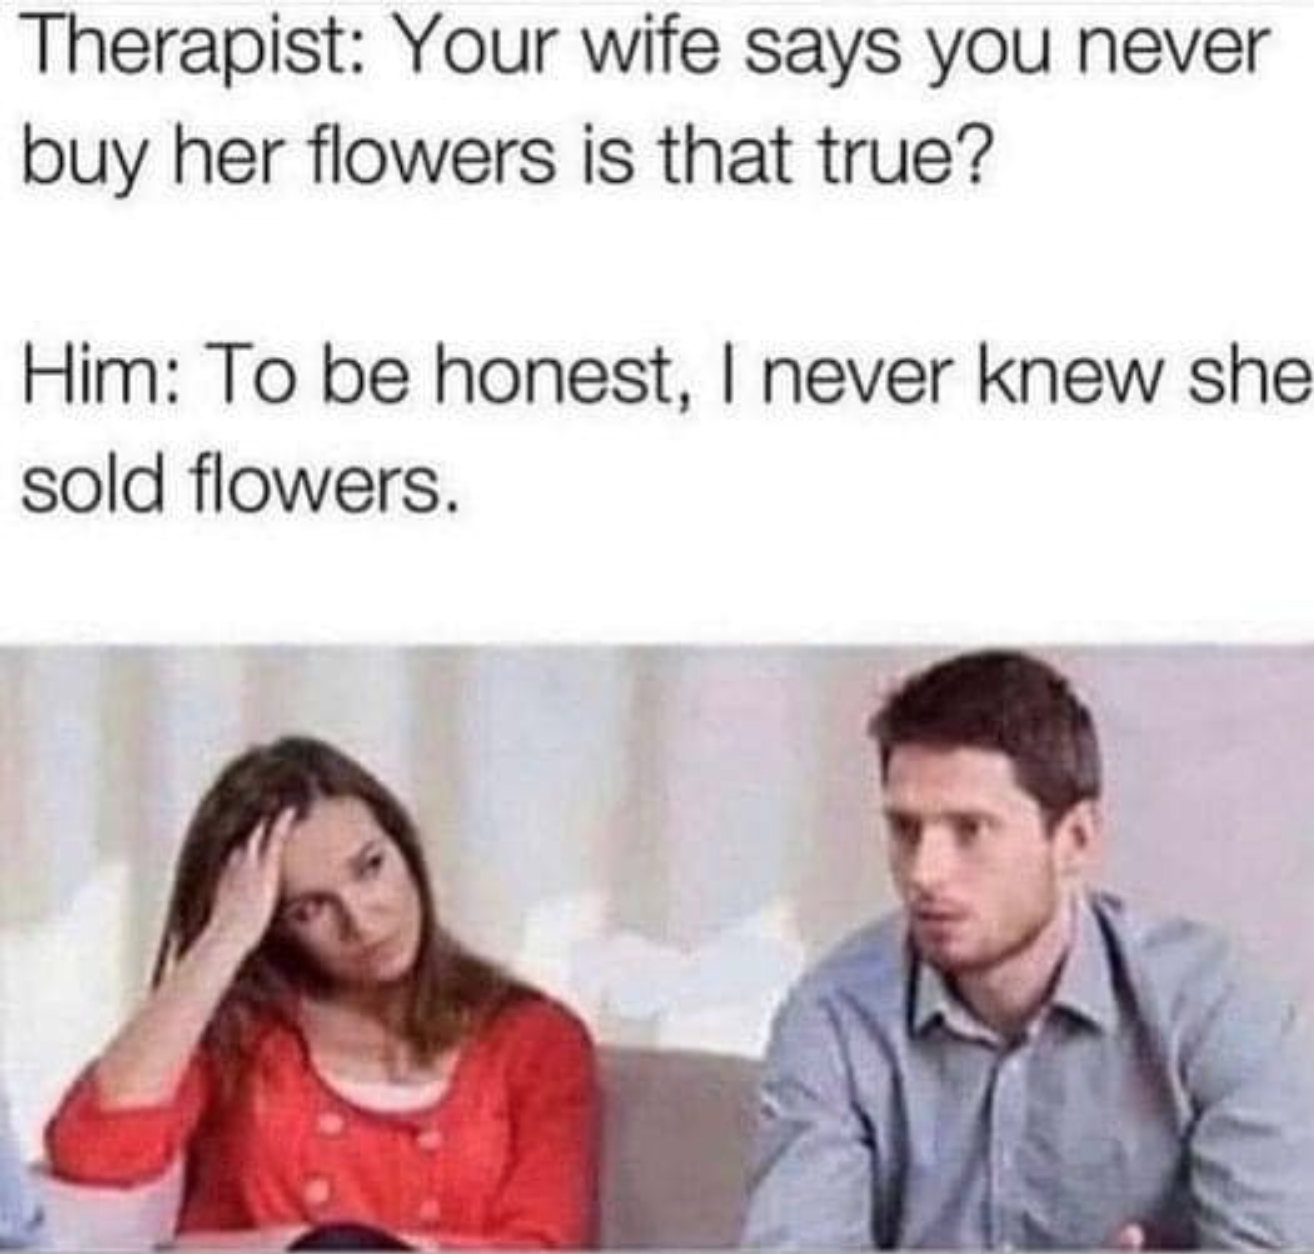 marriage therapy memes - Therapist Your wife says you never buy her flowers is that true? Him To be honest, I never knew she sold flowers.